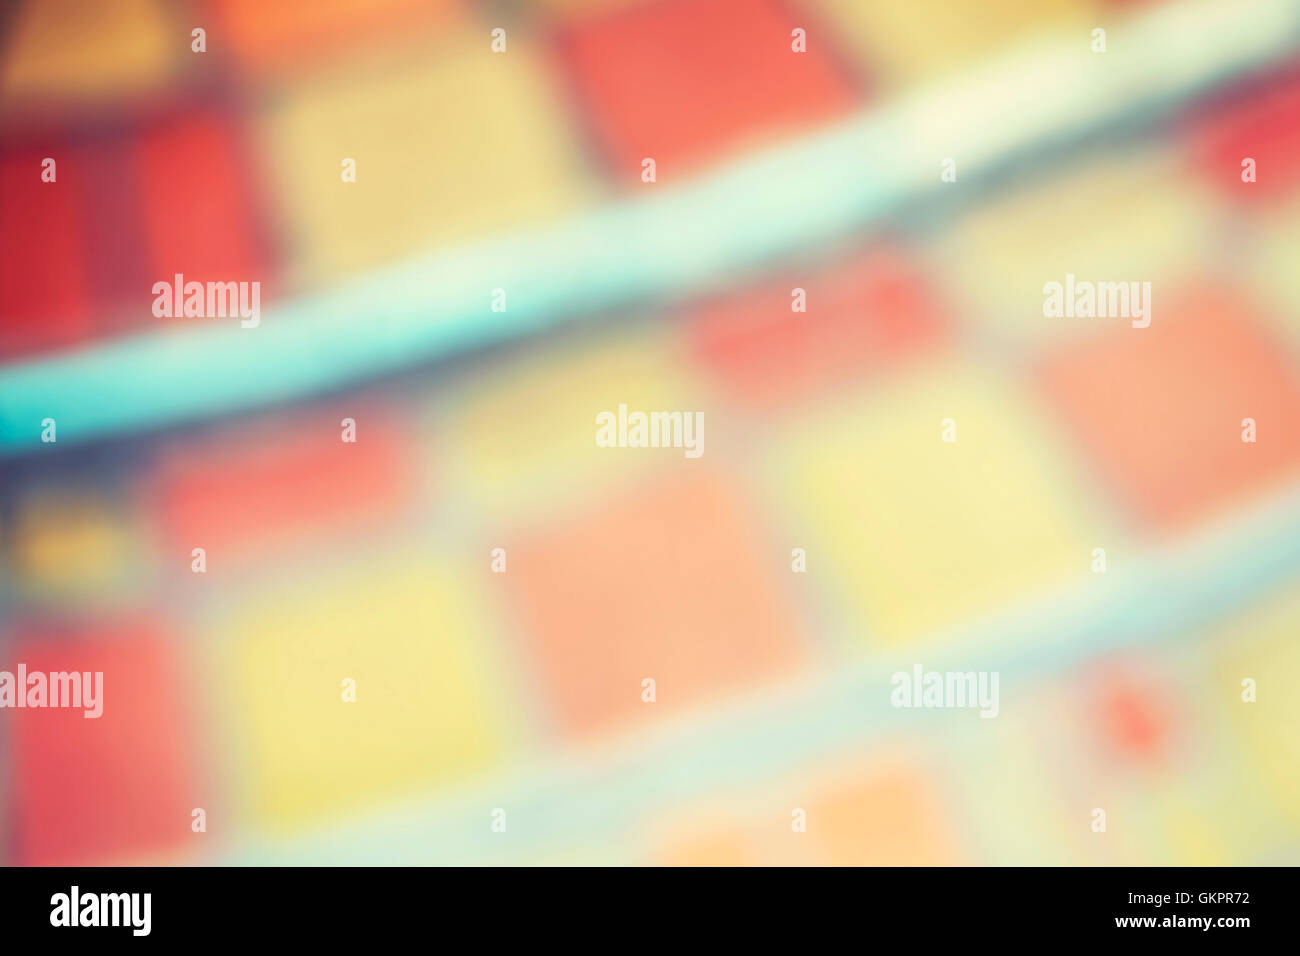 Blurred abstract background made of colorful tiles. Stock Photo